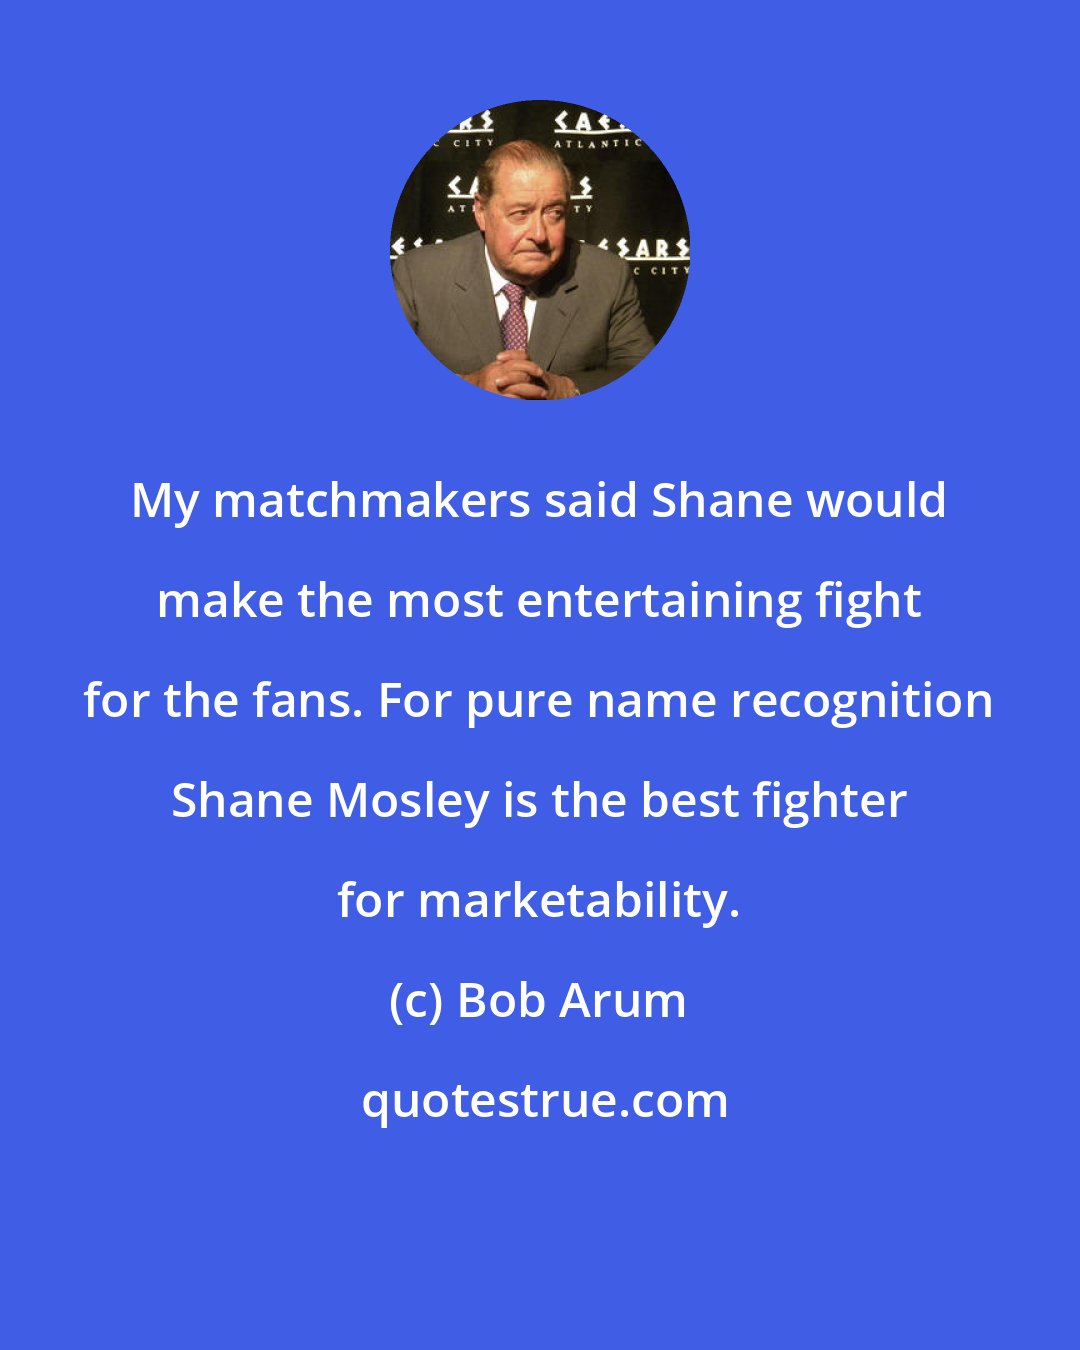 Bob Arum: My matchmakers said Shane would make the most entertaining fight for the fans. For pure name recognition Shane Mosley is the best fighter for marketability.